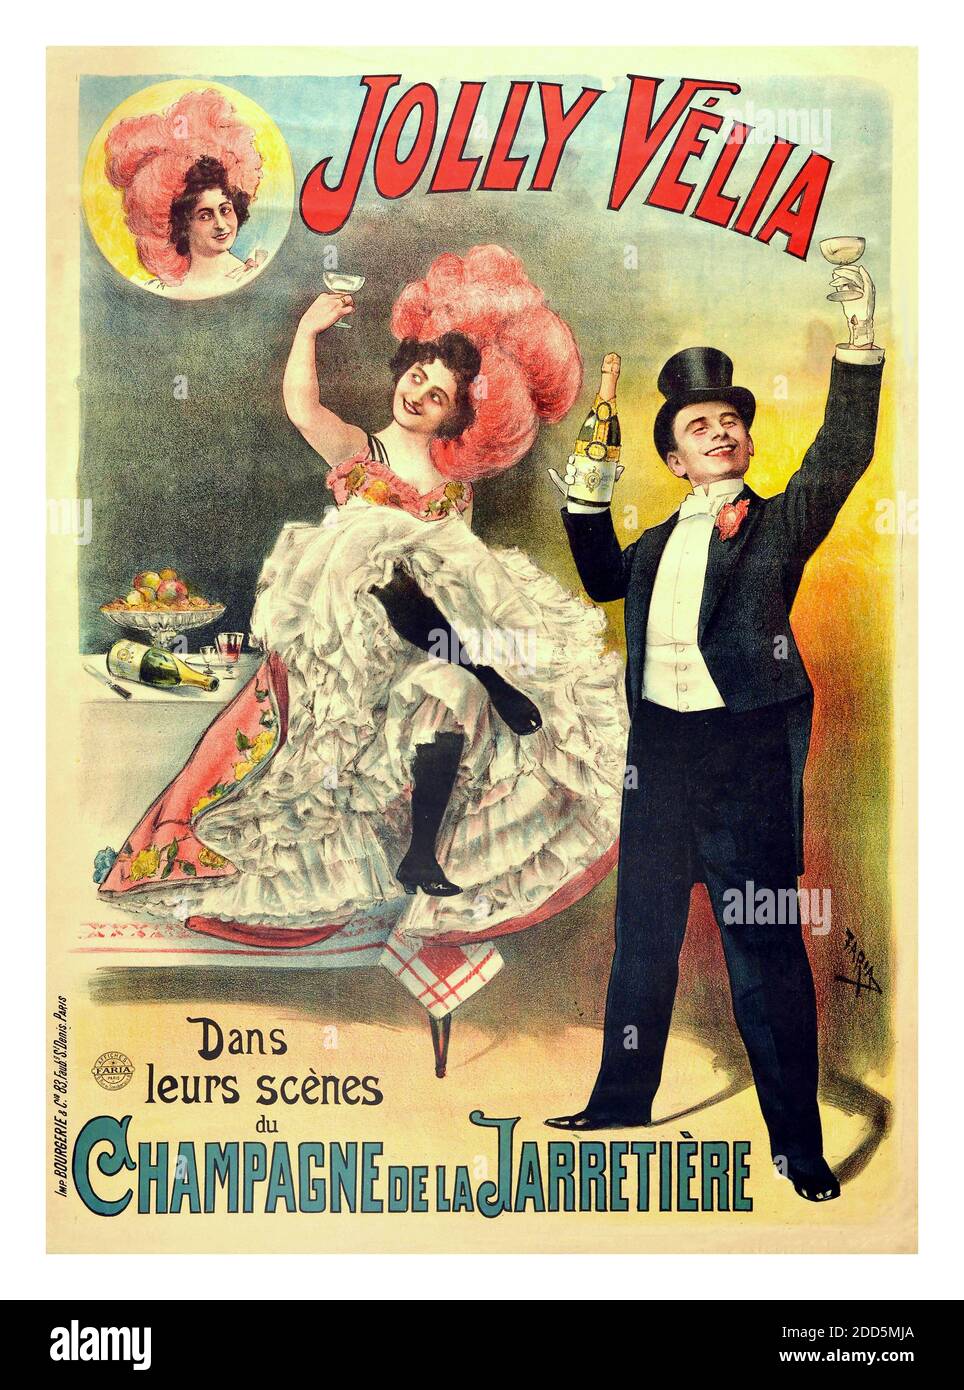 Vintage 1880's advertising theatre poster for a production of Jolly Velia - Dans leurs scenes du champagne de la Jarretière / In their scenes of champagne from the Garter -artwork by Cândido Aragonez de Faria (1849-1911) features a lady wearing a large pink and white dress with a feathered hat sitting on a table with an empty bottle of champagne laying on its side. Next to her a man in a black suit and a top hat holding a second bottle with one hand and raising a glass with the other. Cândido Aragonez de Faria was a Brazilian caricaturist, painter, lithographer and poster designer Paris France Stock Photo